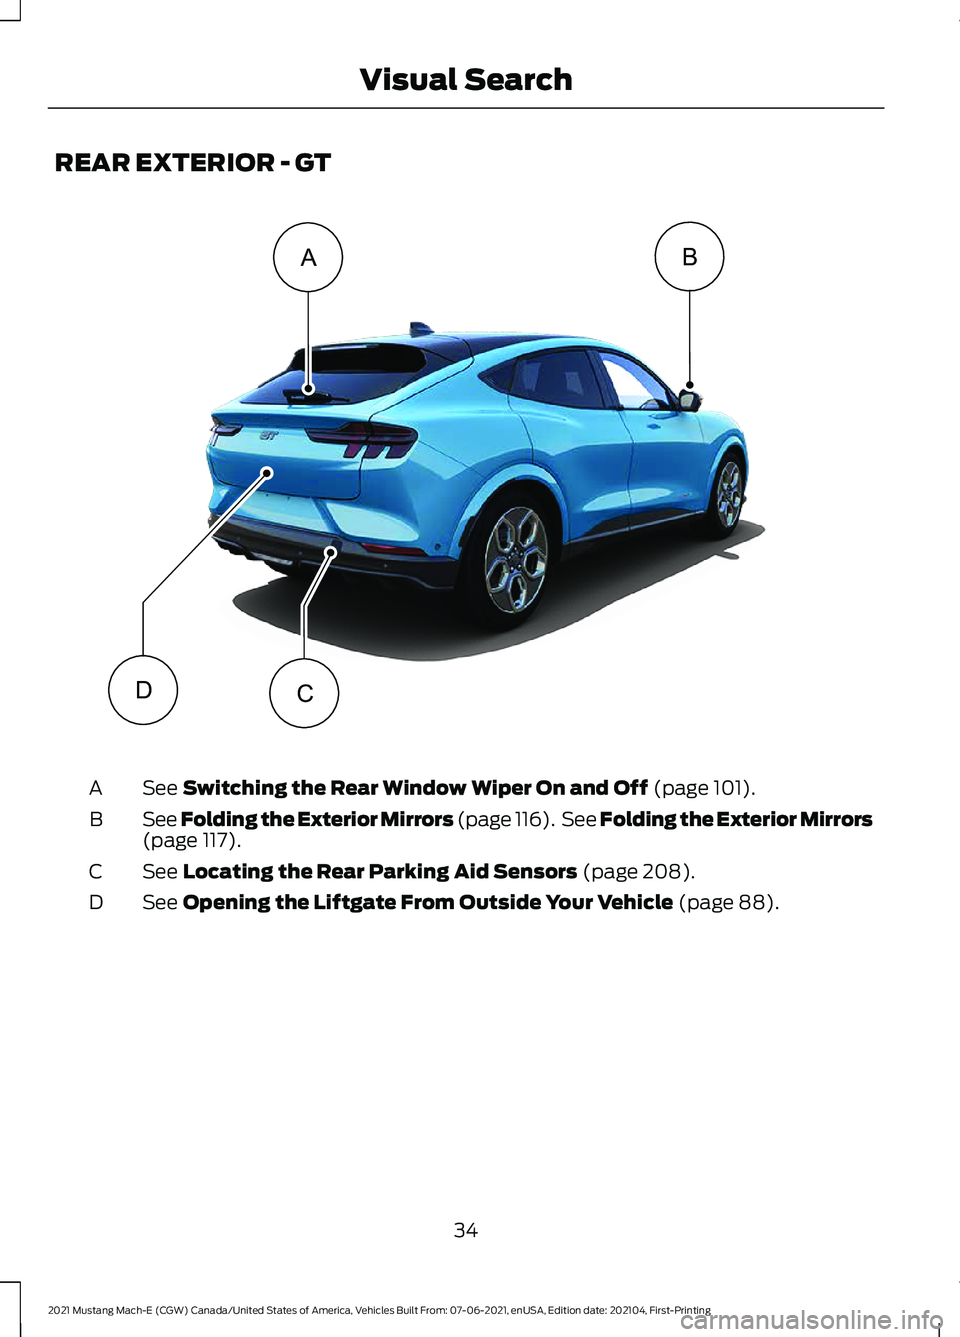 FORD MUSTANG MACH-E 2021  Owners Manual REAR EXTERIOR - GT
See Switching the Rear Window Wiper On and Off (page 101).
A
See Folding the Exterior Mirrors (page 116).  See Folding the Exterior Mirrors
(page 
117).
B
See 
Locating the Rear Par